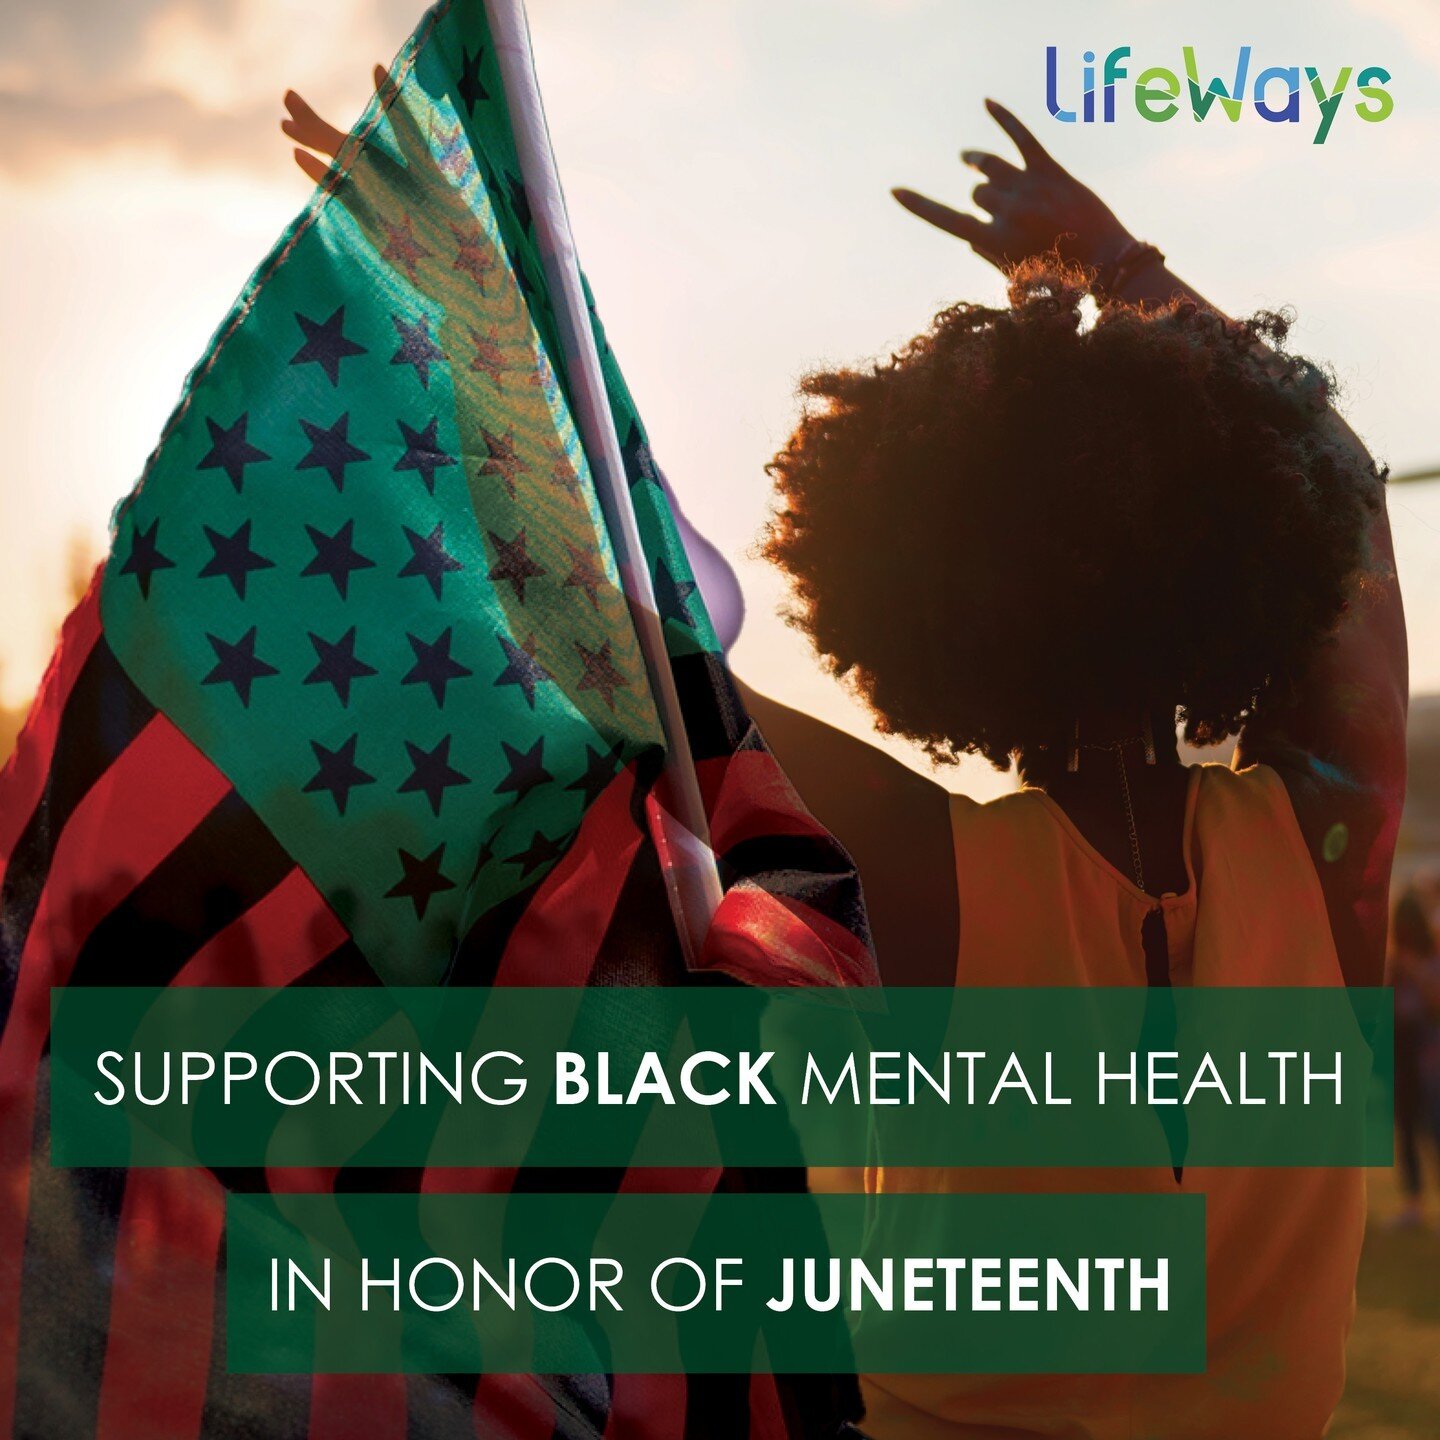 June 19th is Juneteenth.
It is the oldest nationally celebrated commemoration of the ending of slavery in the United States. 

Juneteenth and Black Mental Health

Juneteenth is central to Black American mental health and well-being because it&rsquo;s